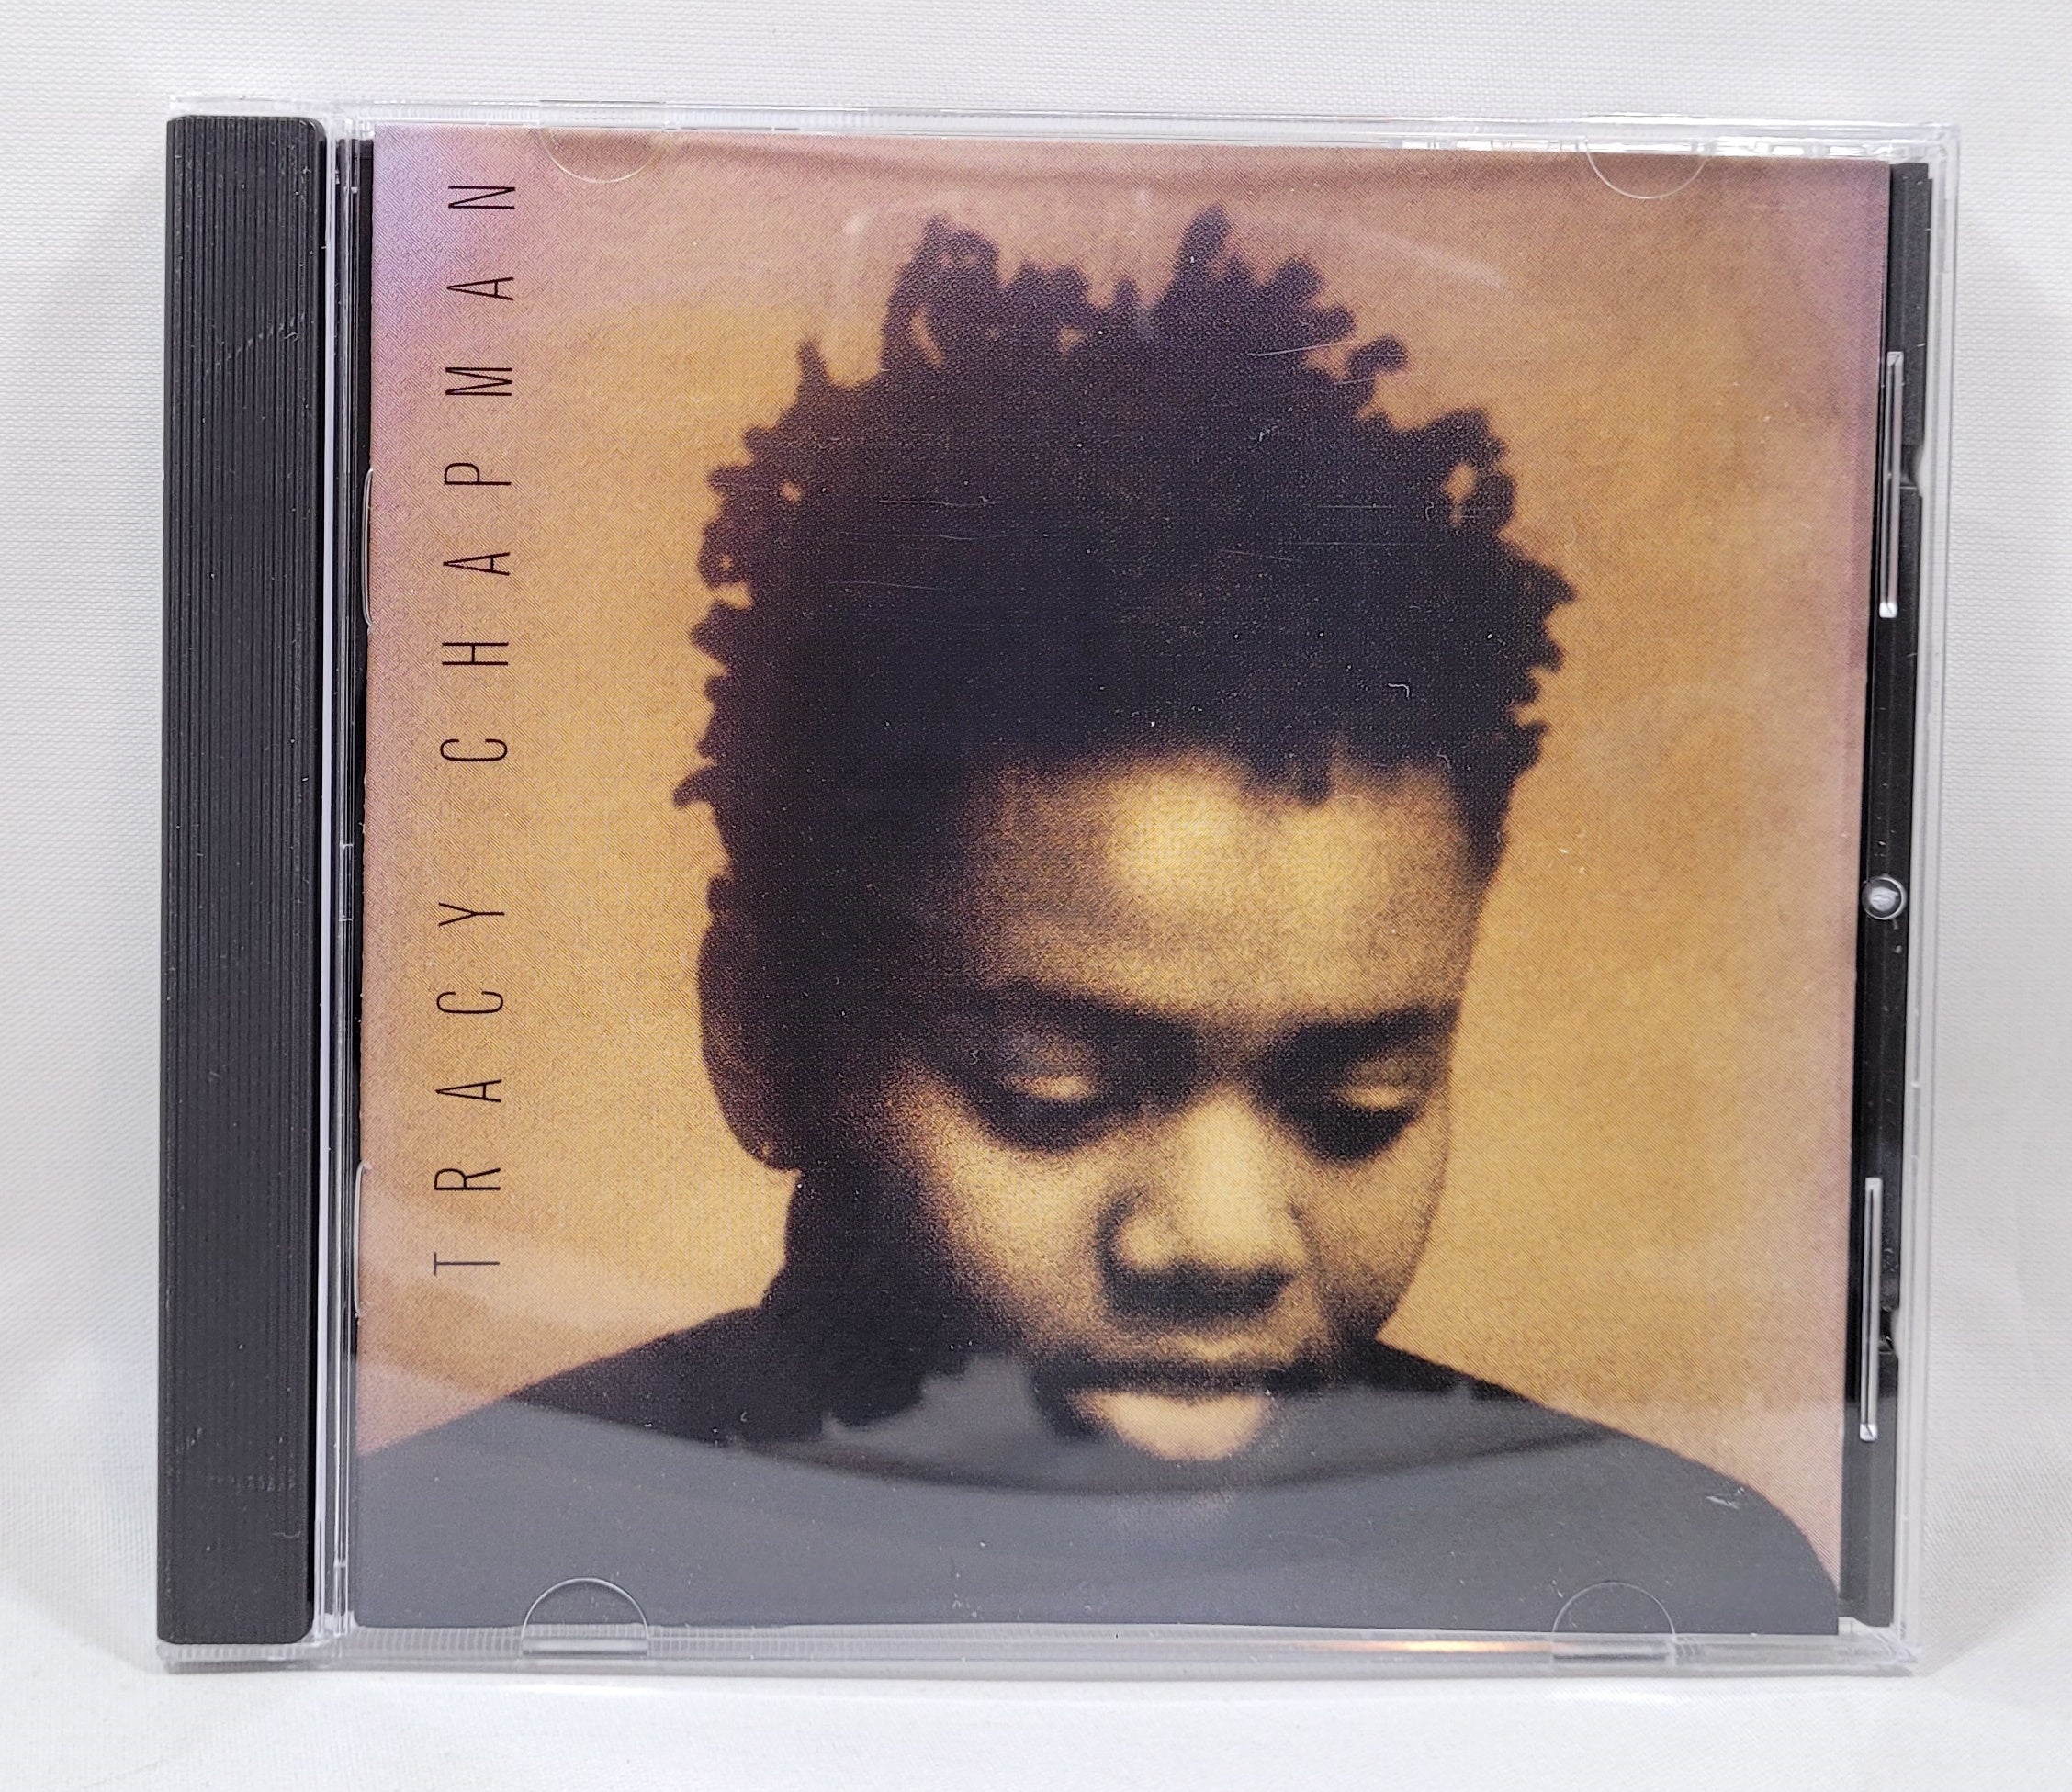 Tracy Chapman - Tracy Chapman [Reissue] [Used CD] [D]